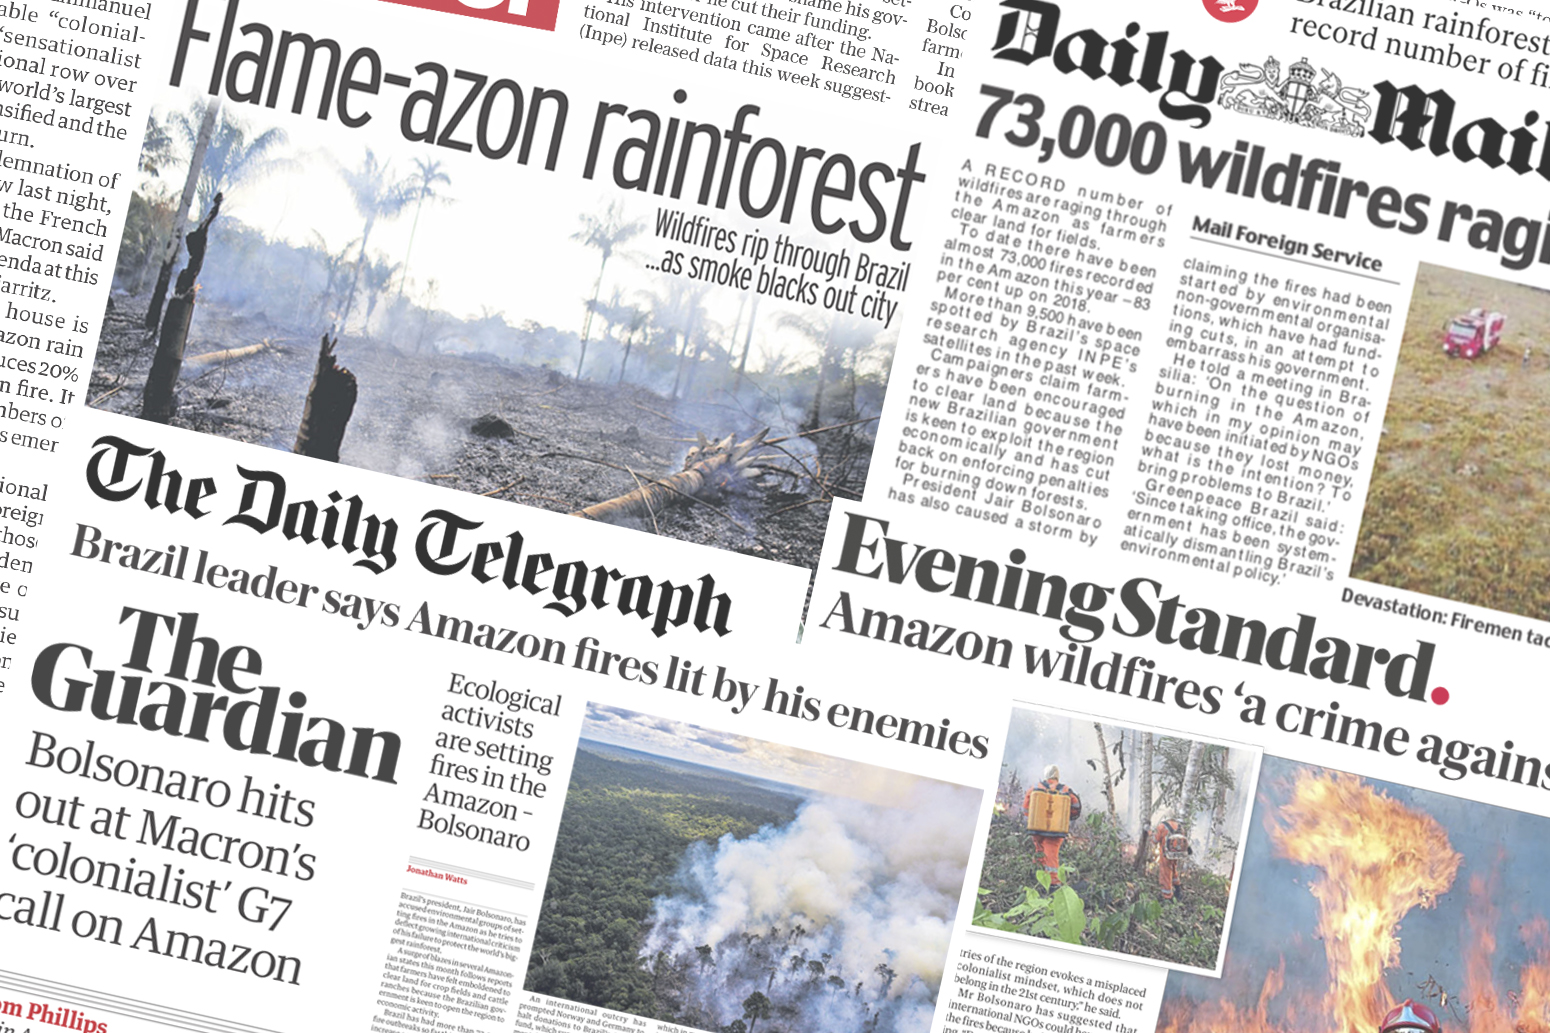 Media reaction: Amazon fires and climate change - Carbon Brief